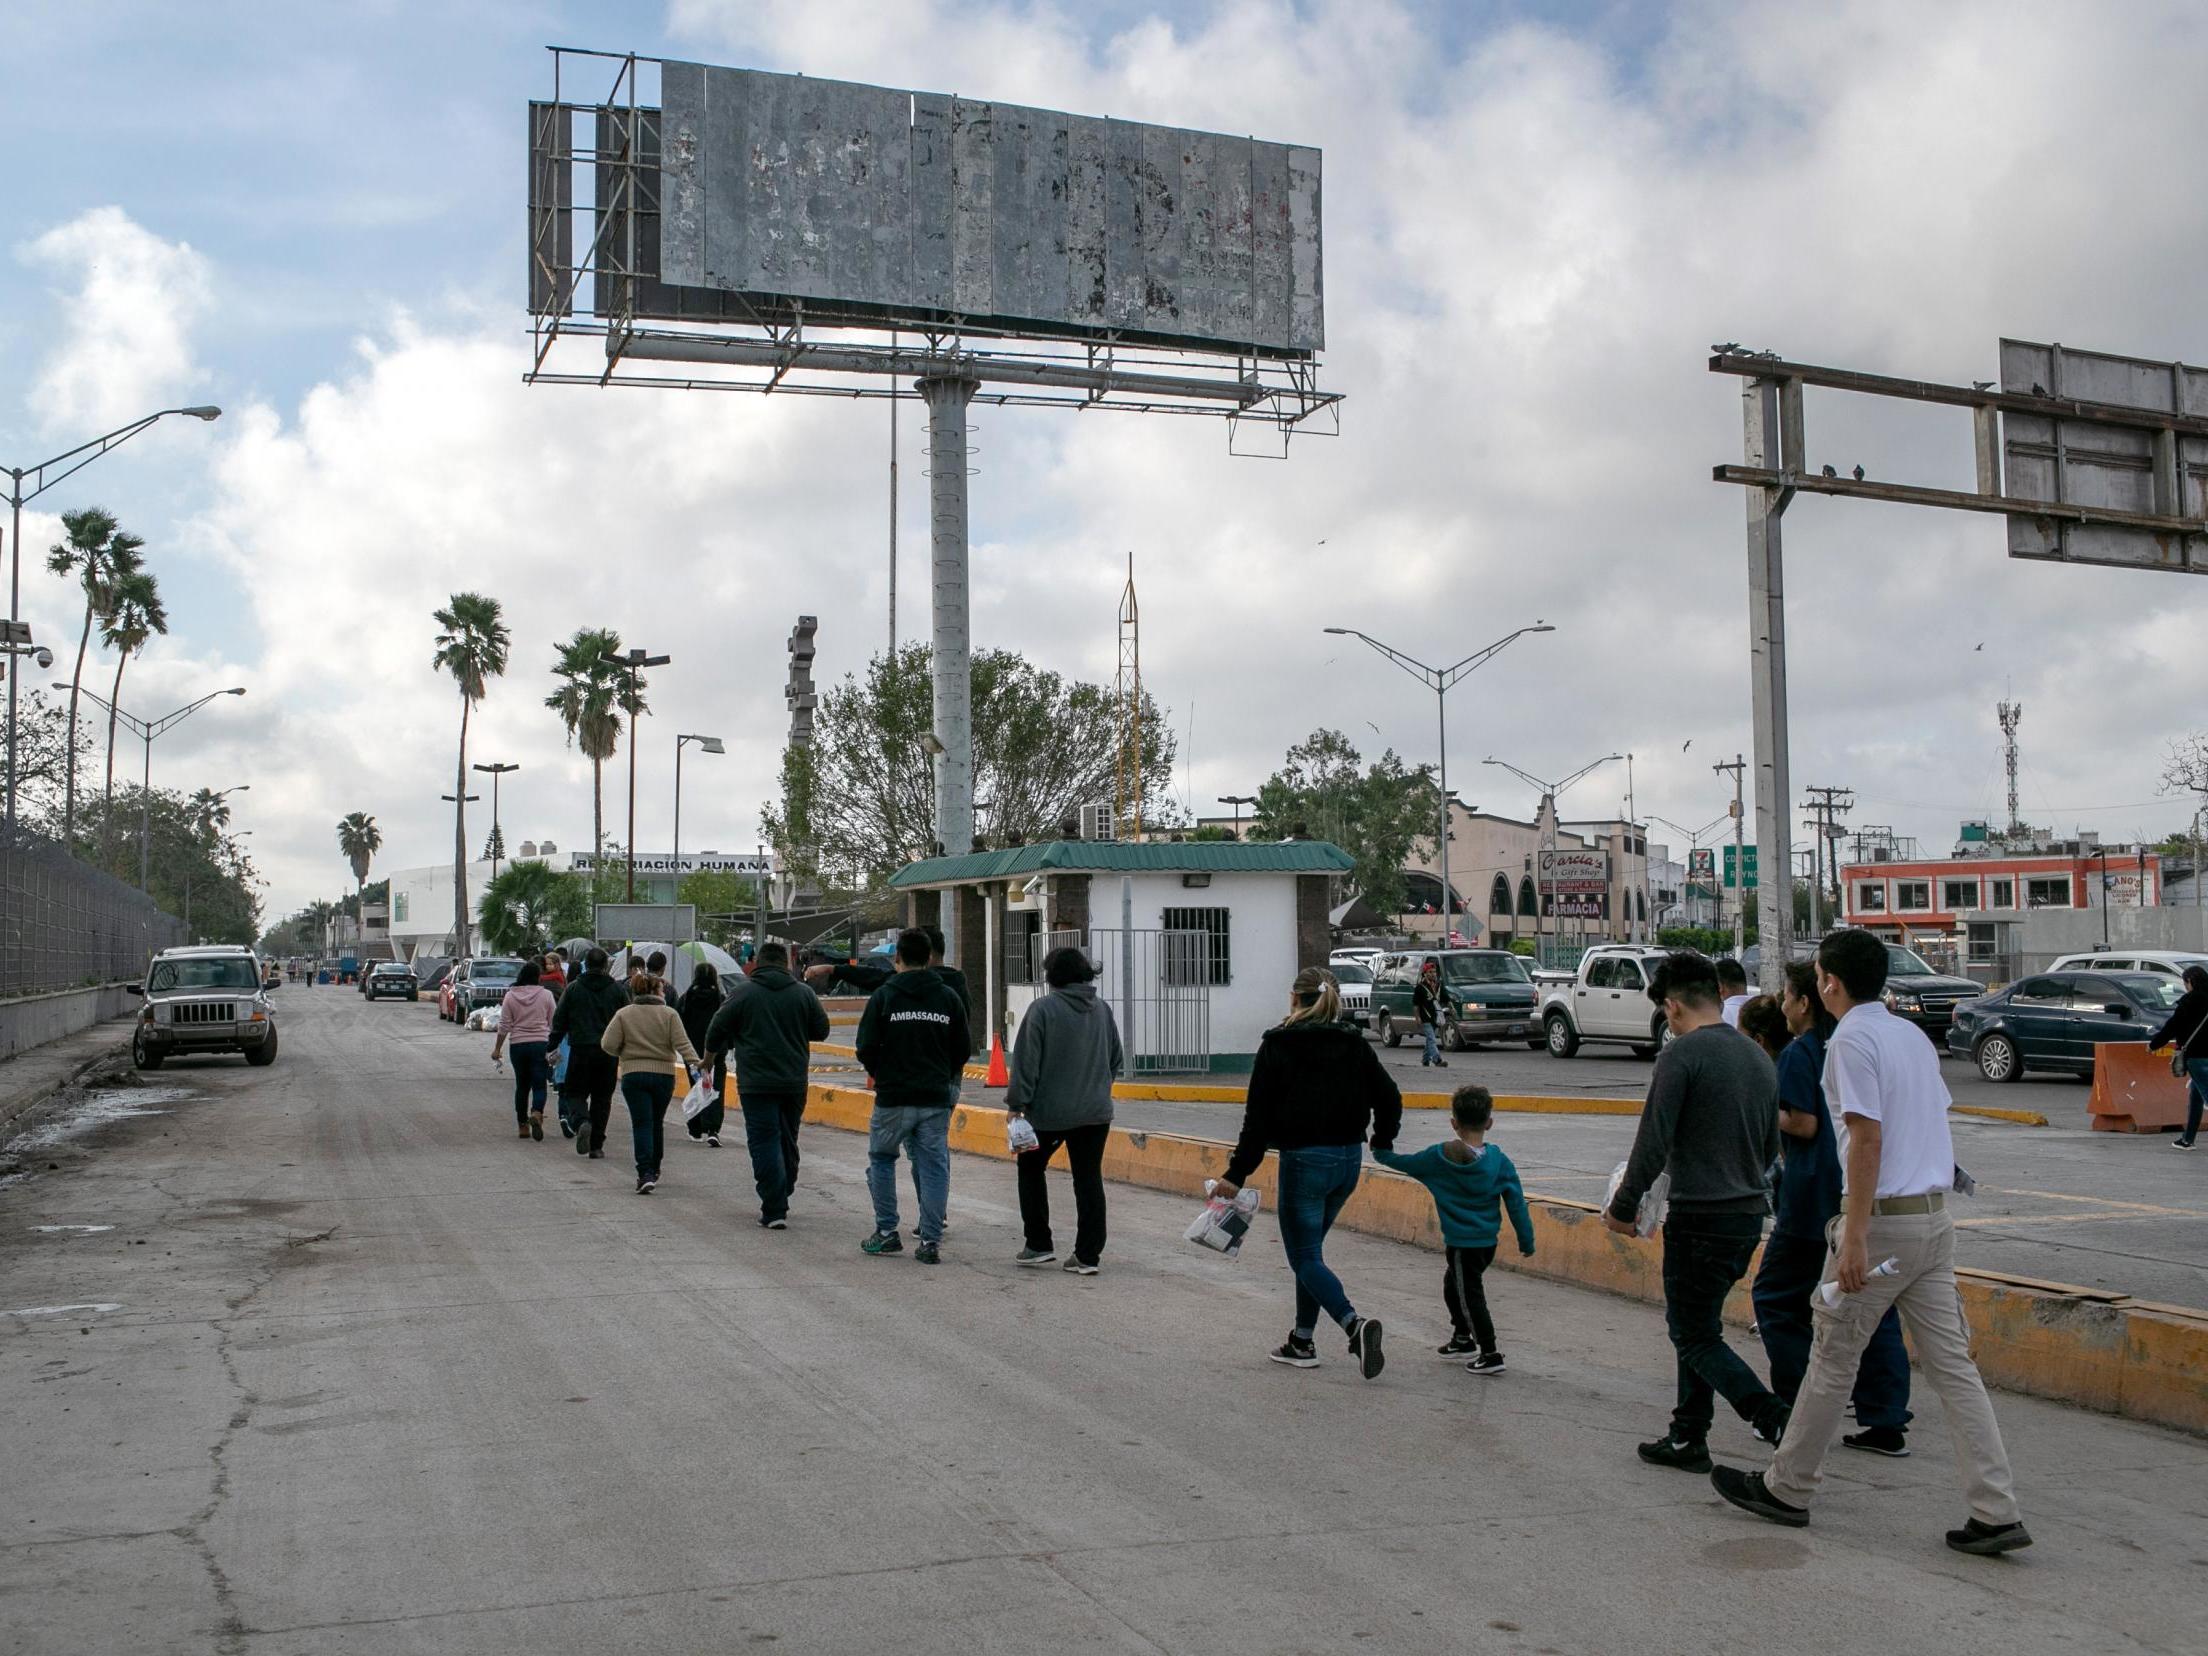 Asylum-seekers walk back into Mexico after their immigration court hearing on 9 December in Brownsville, Texas